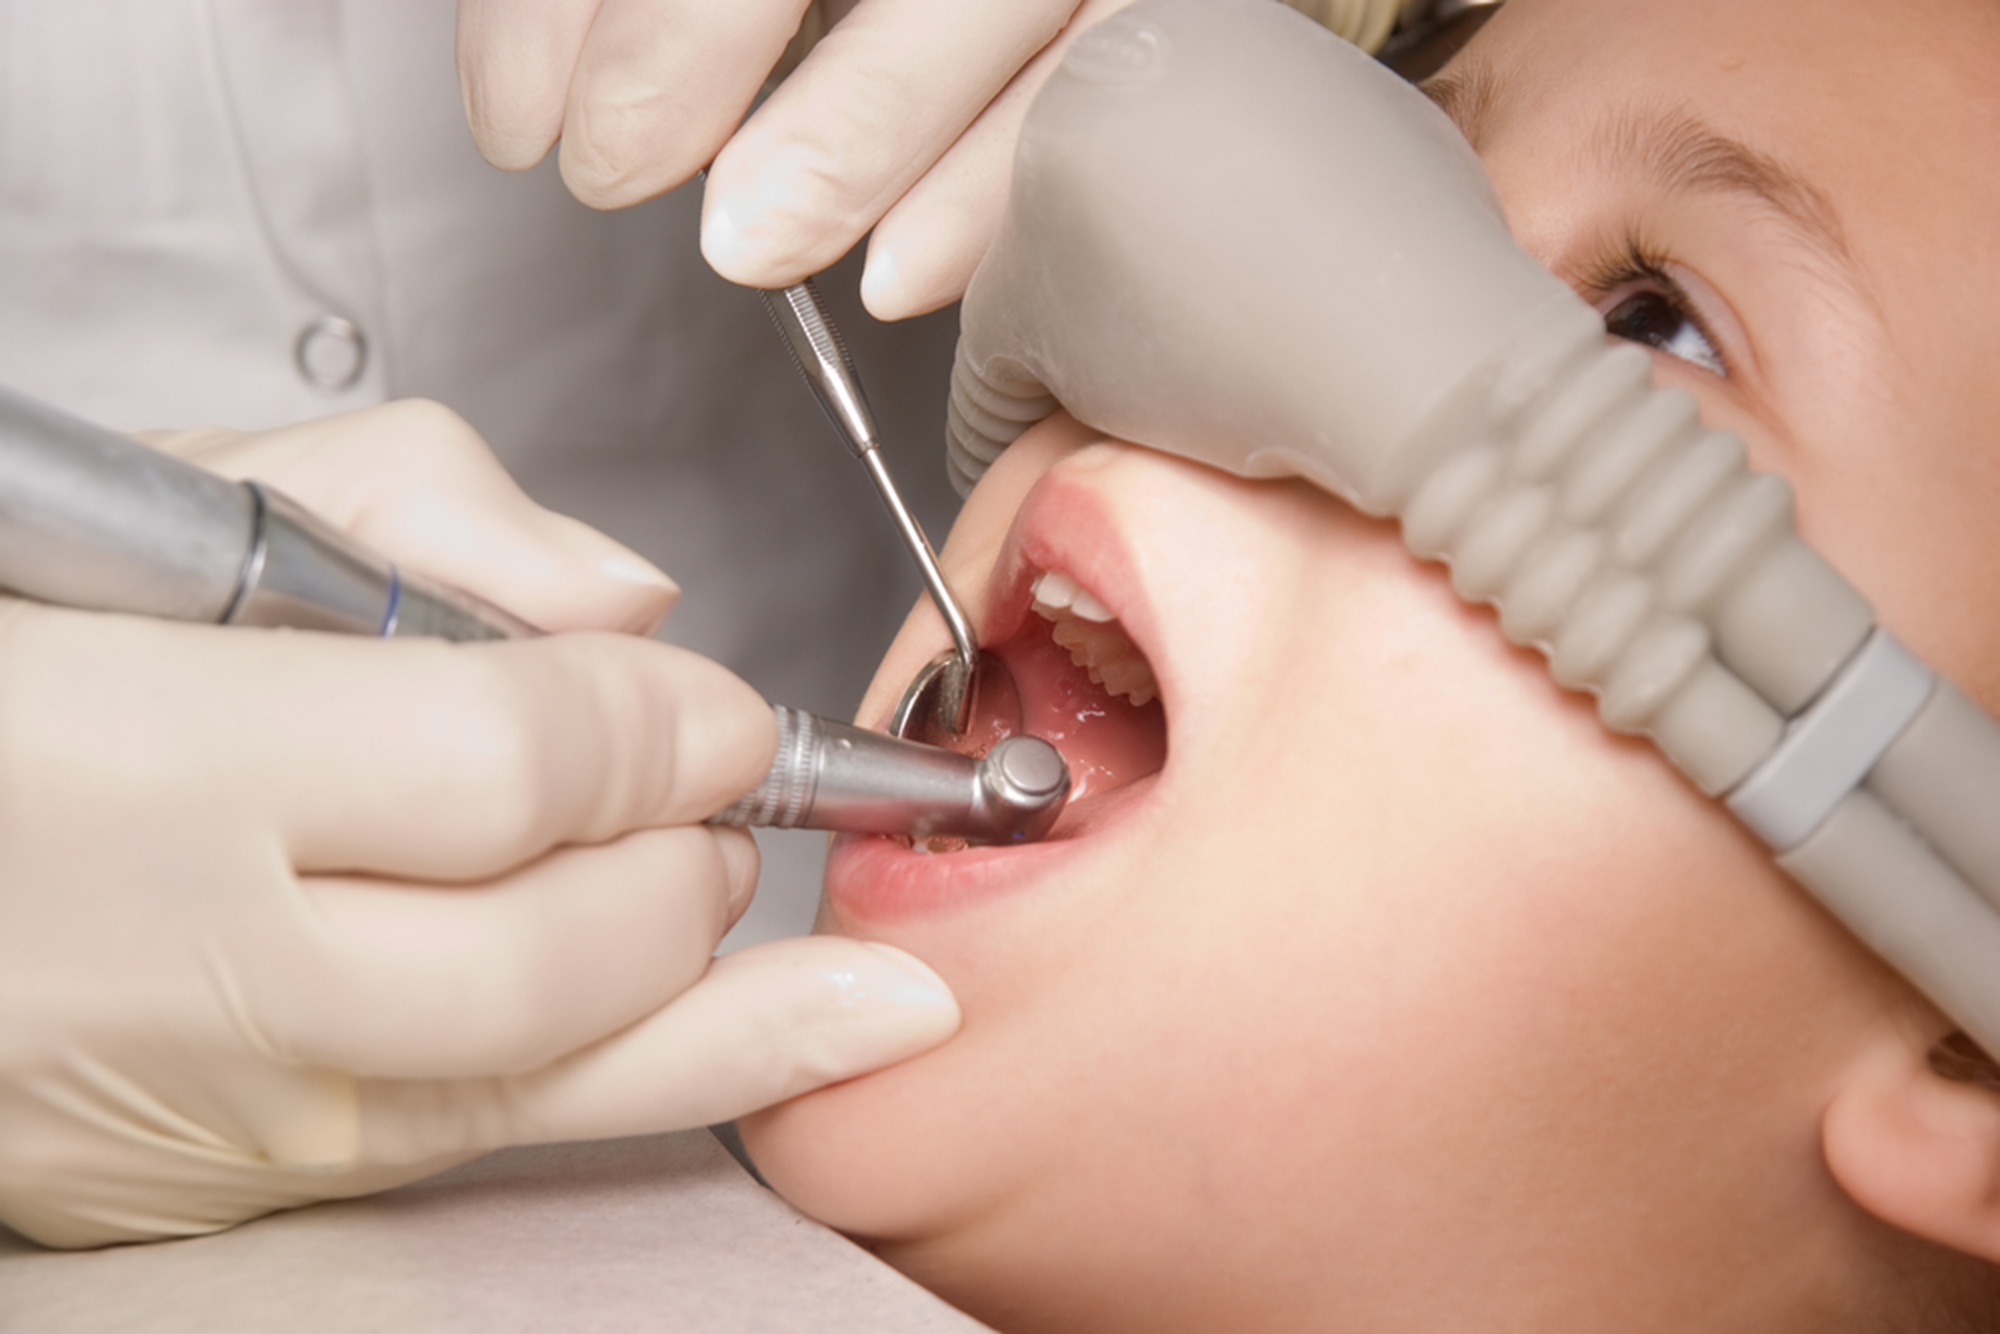 what are the benefit of sedation dentistry